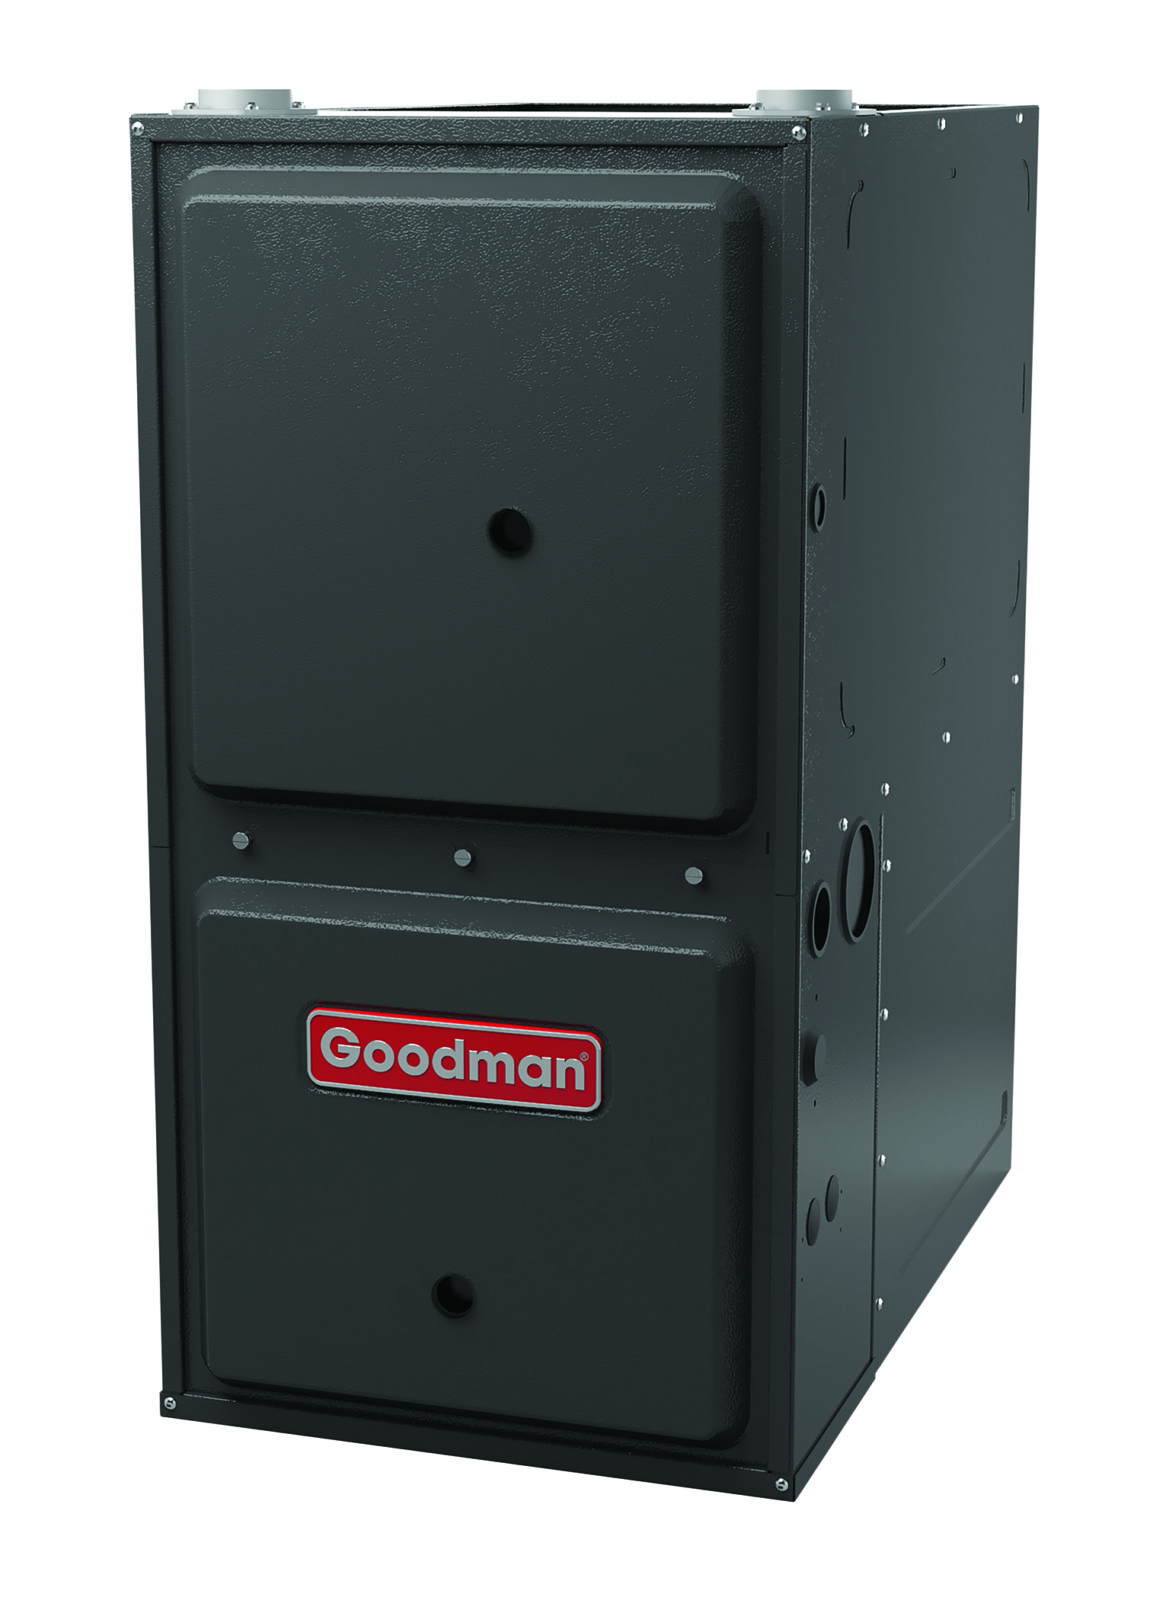 Goodman 34,120 BTU 10 kW Electric Furnace with 1,200 CFM Airflow and C